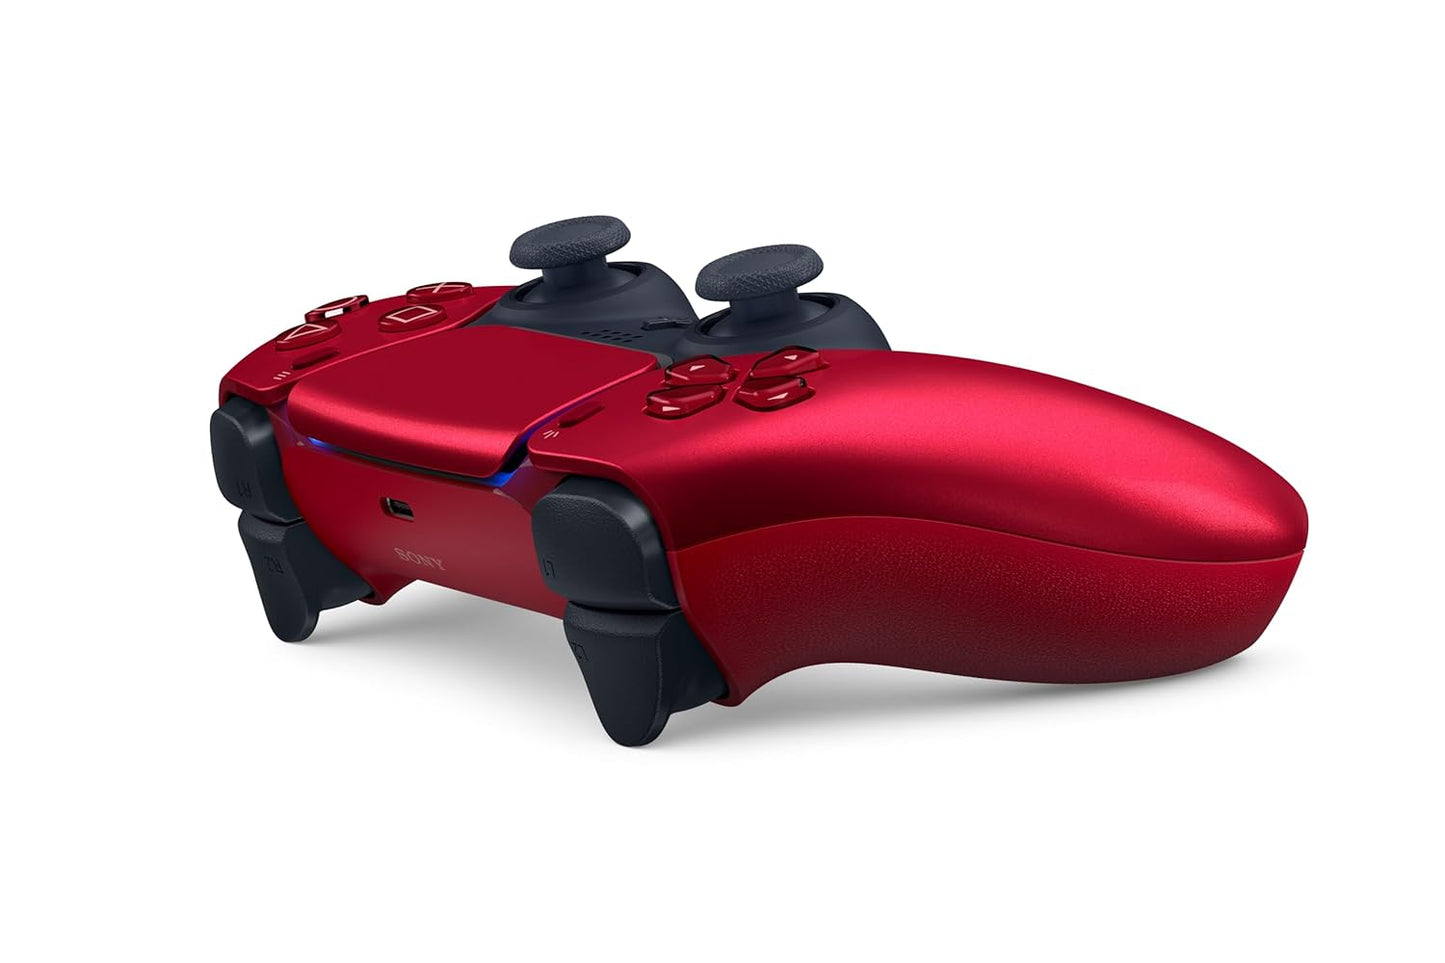 Playstation 5 DualSense Wireless Controller - Volcanic Red